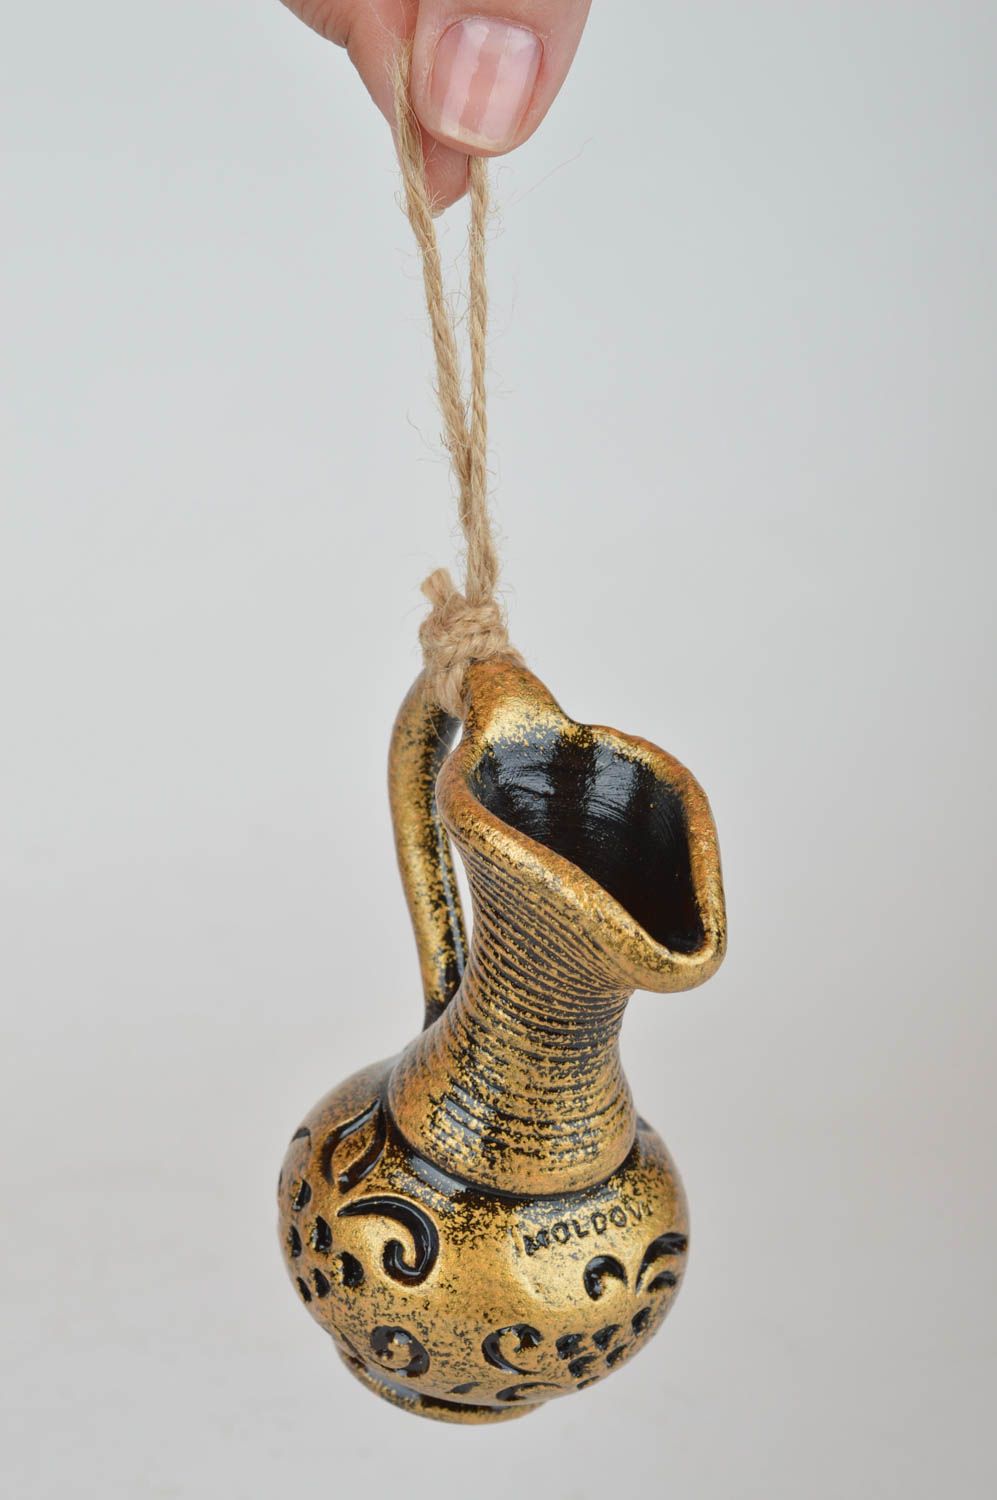 Handmade ceramic pendant in the shape of water pitcher in gold color 0,21 lb photo 3